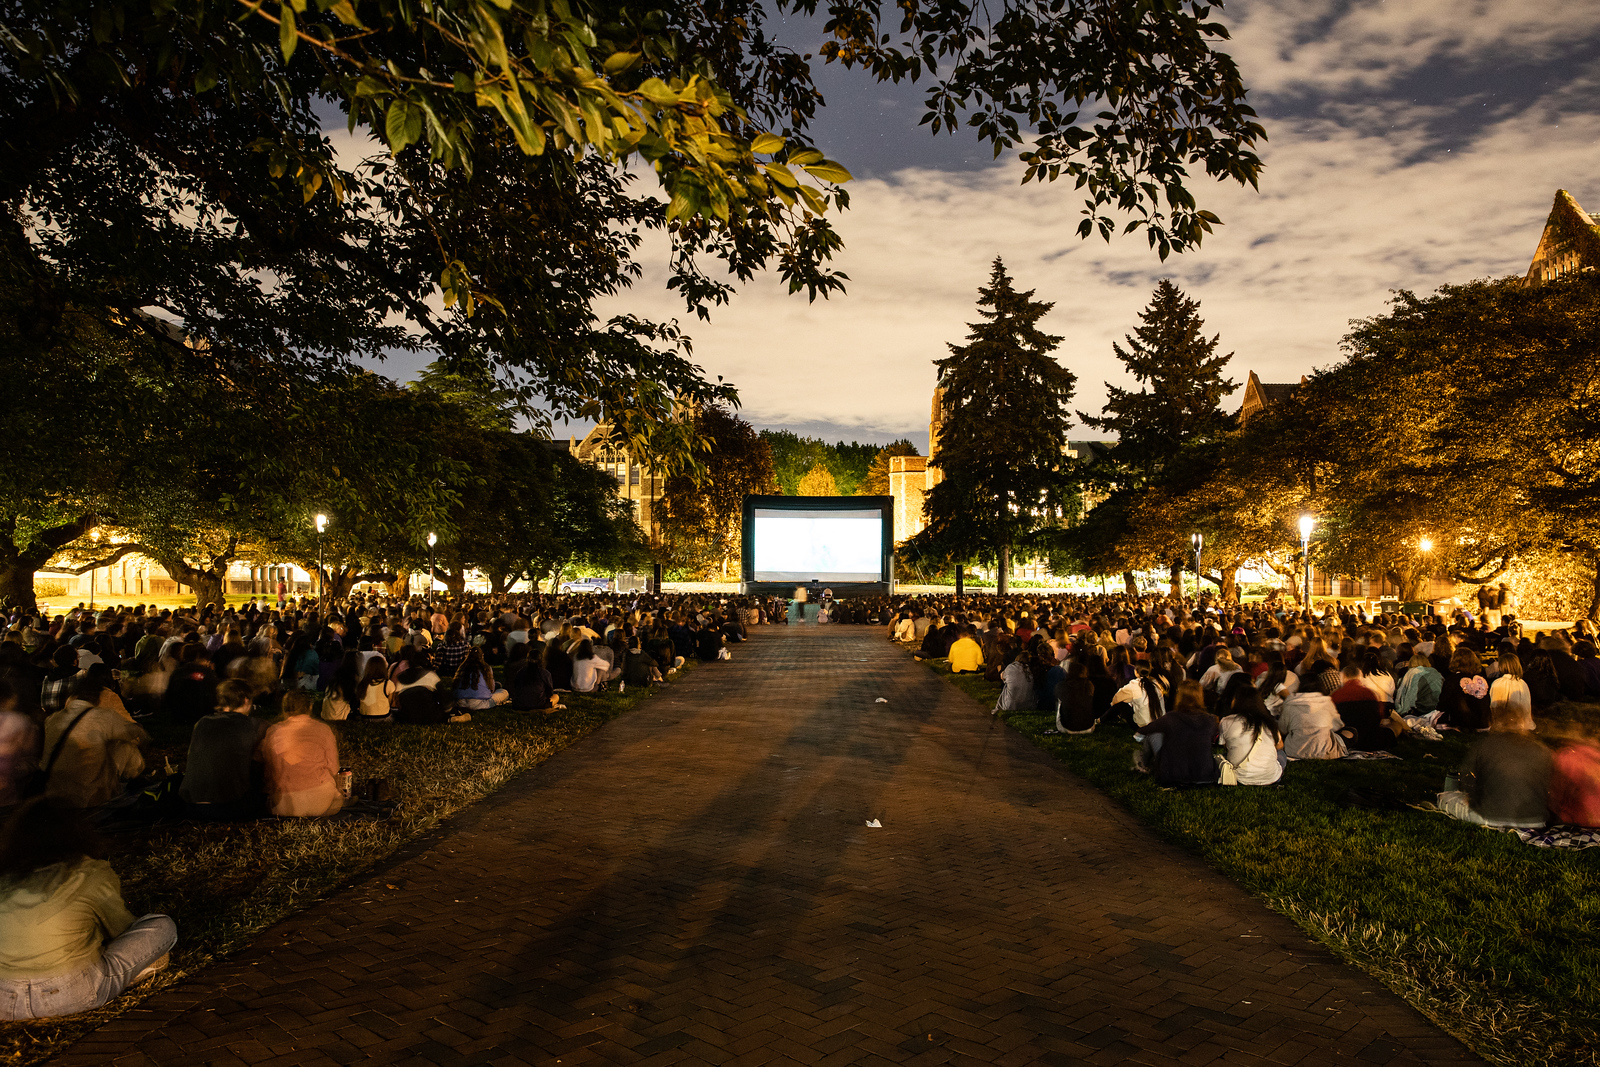 Students gather in the quad to watch a movie at dusk